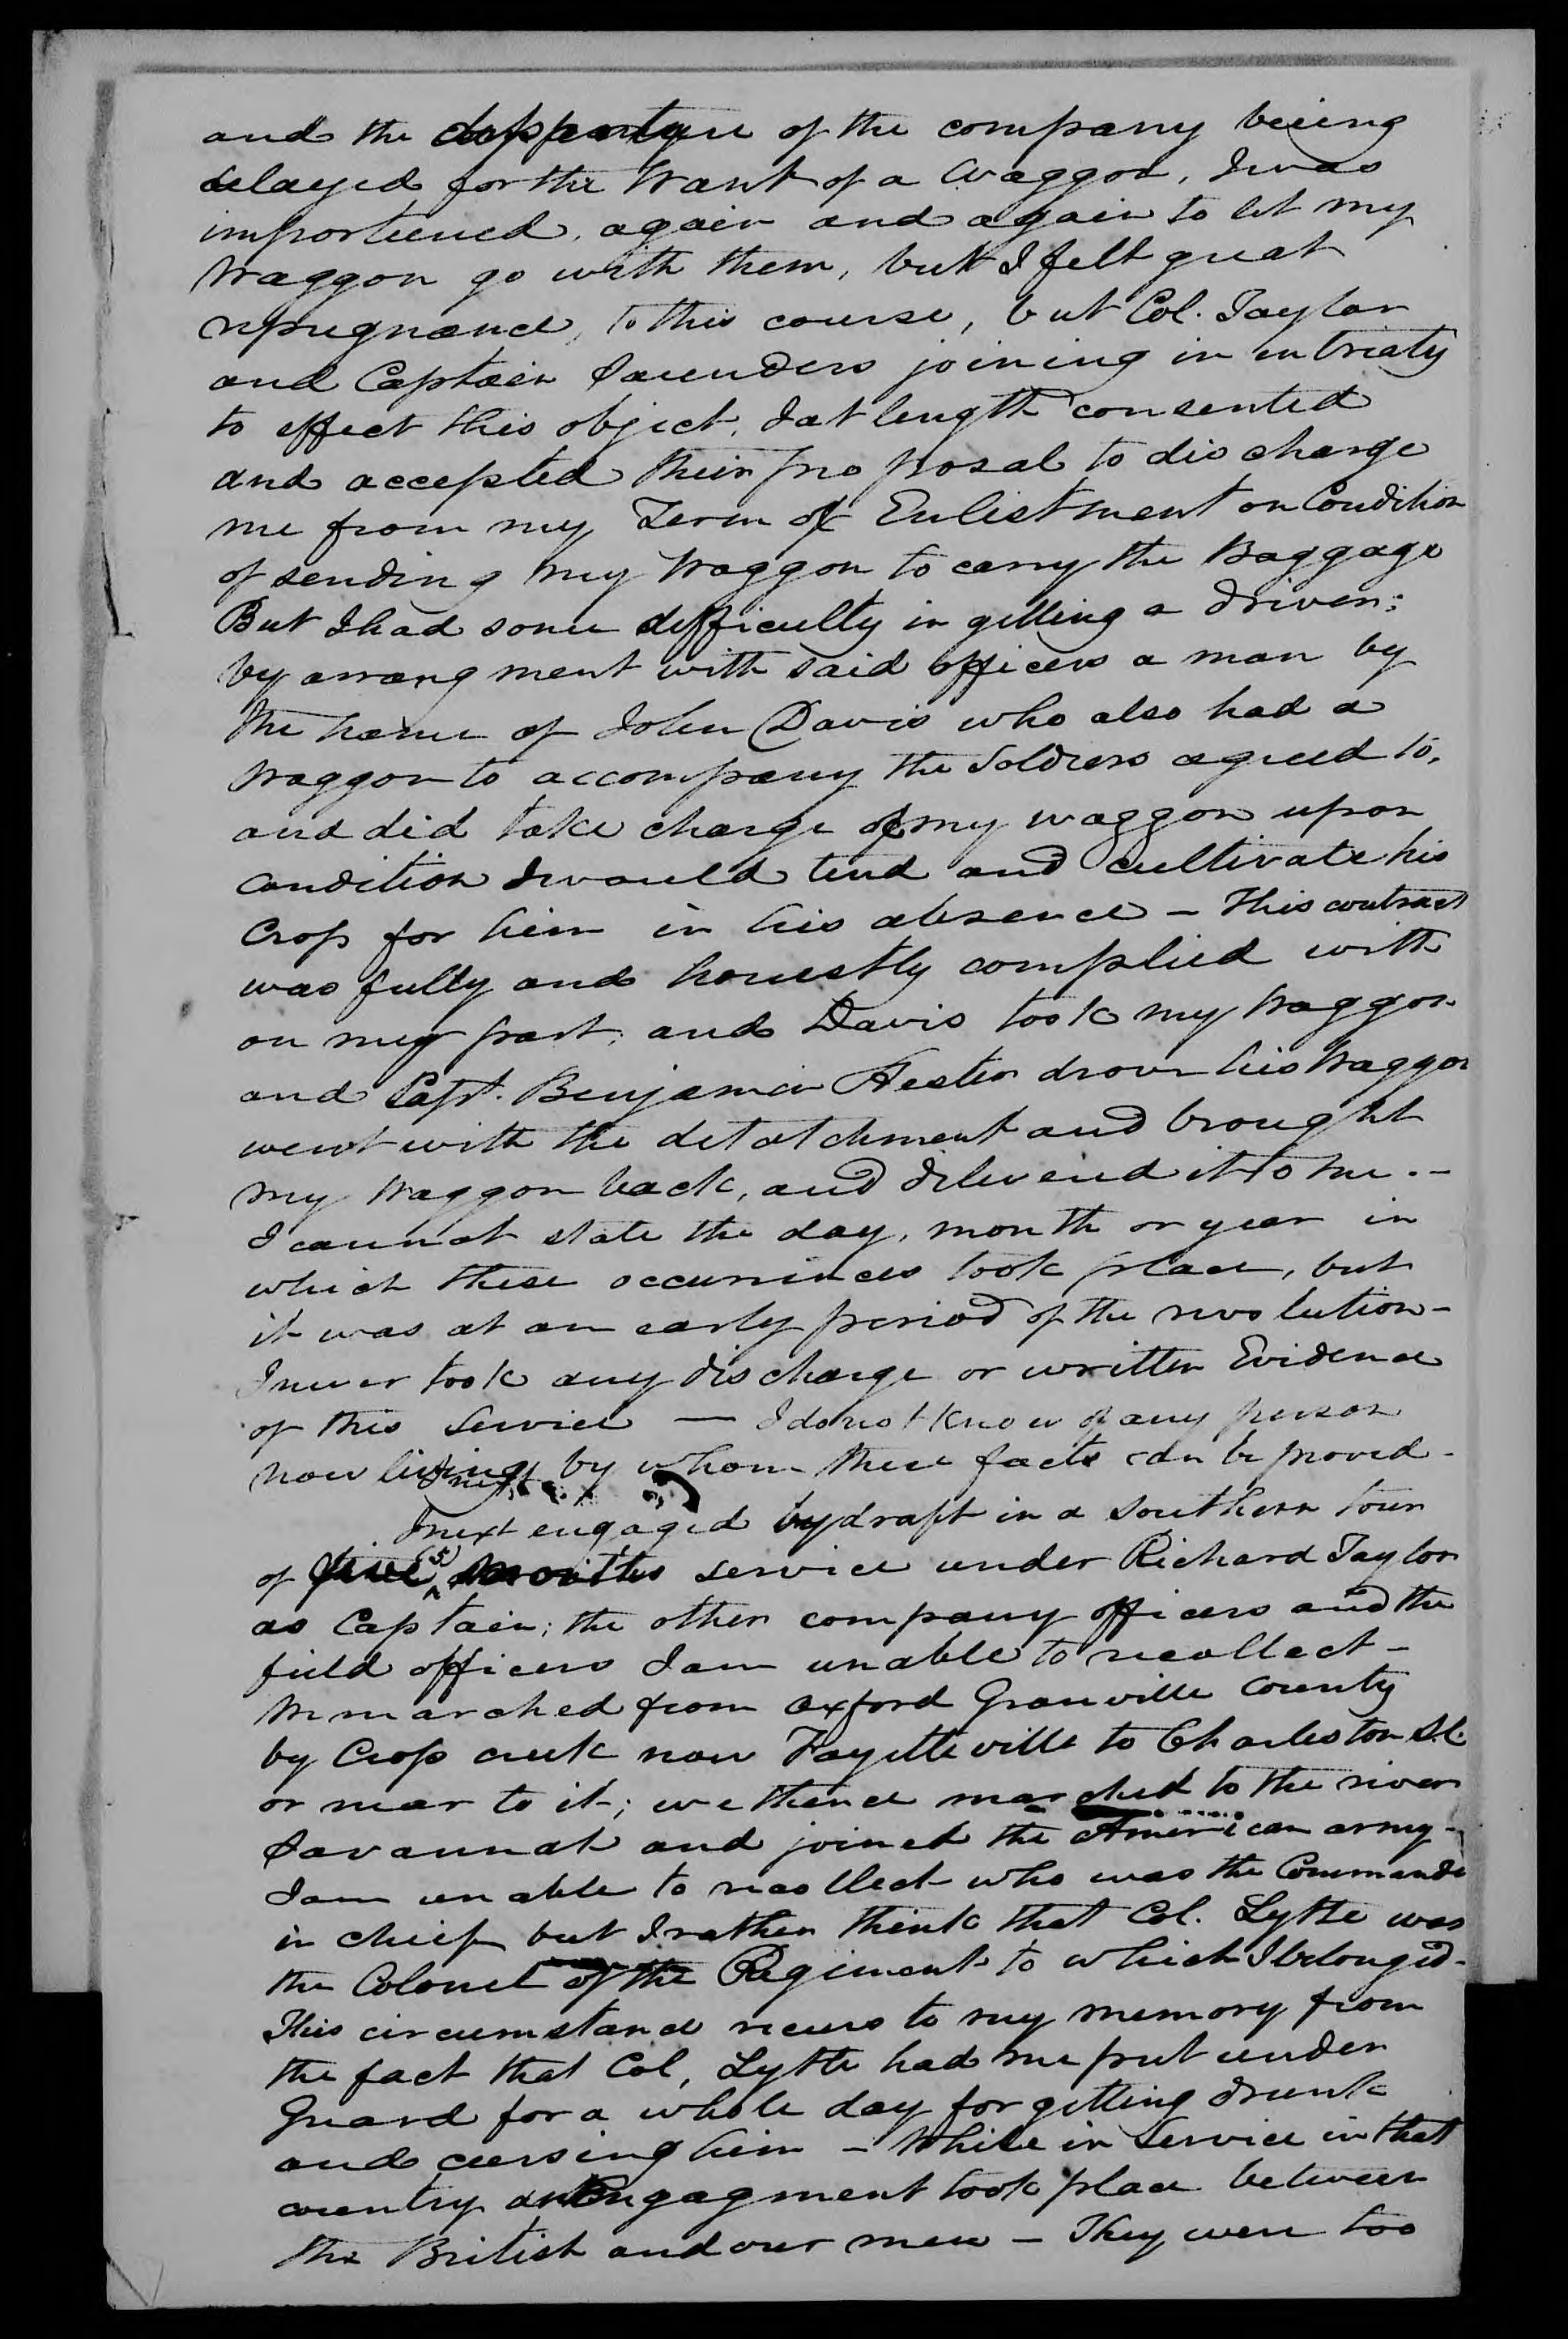 Application for a Veteran's Pension from William Taburn, 10 August 1832, page 2